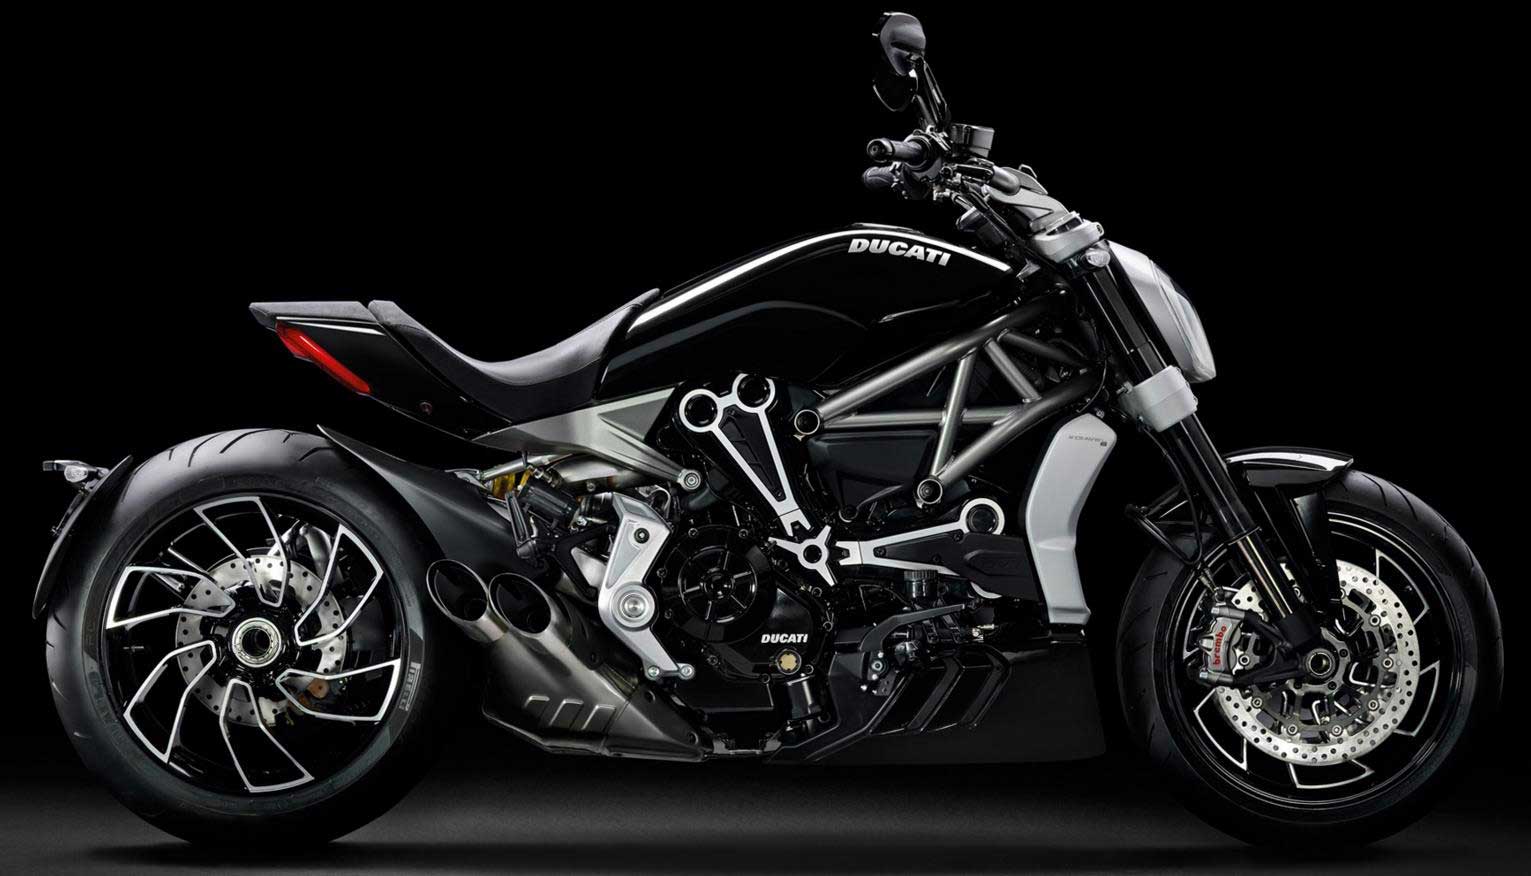 Ducati XDiavel S side view